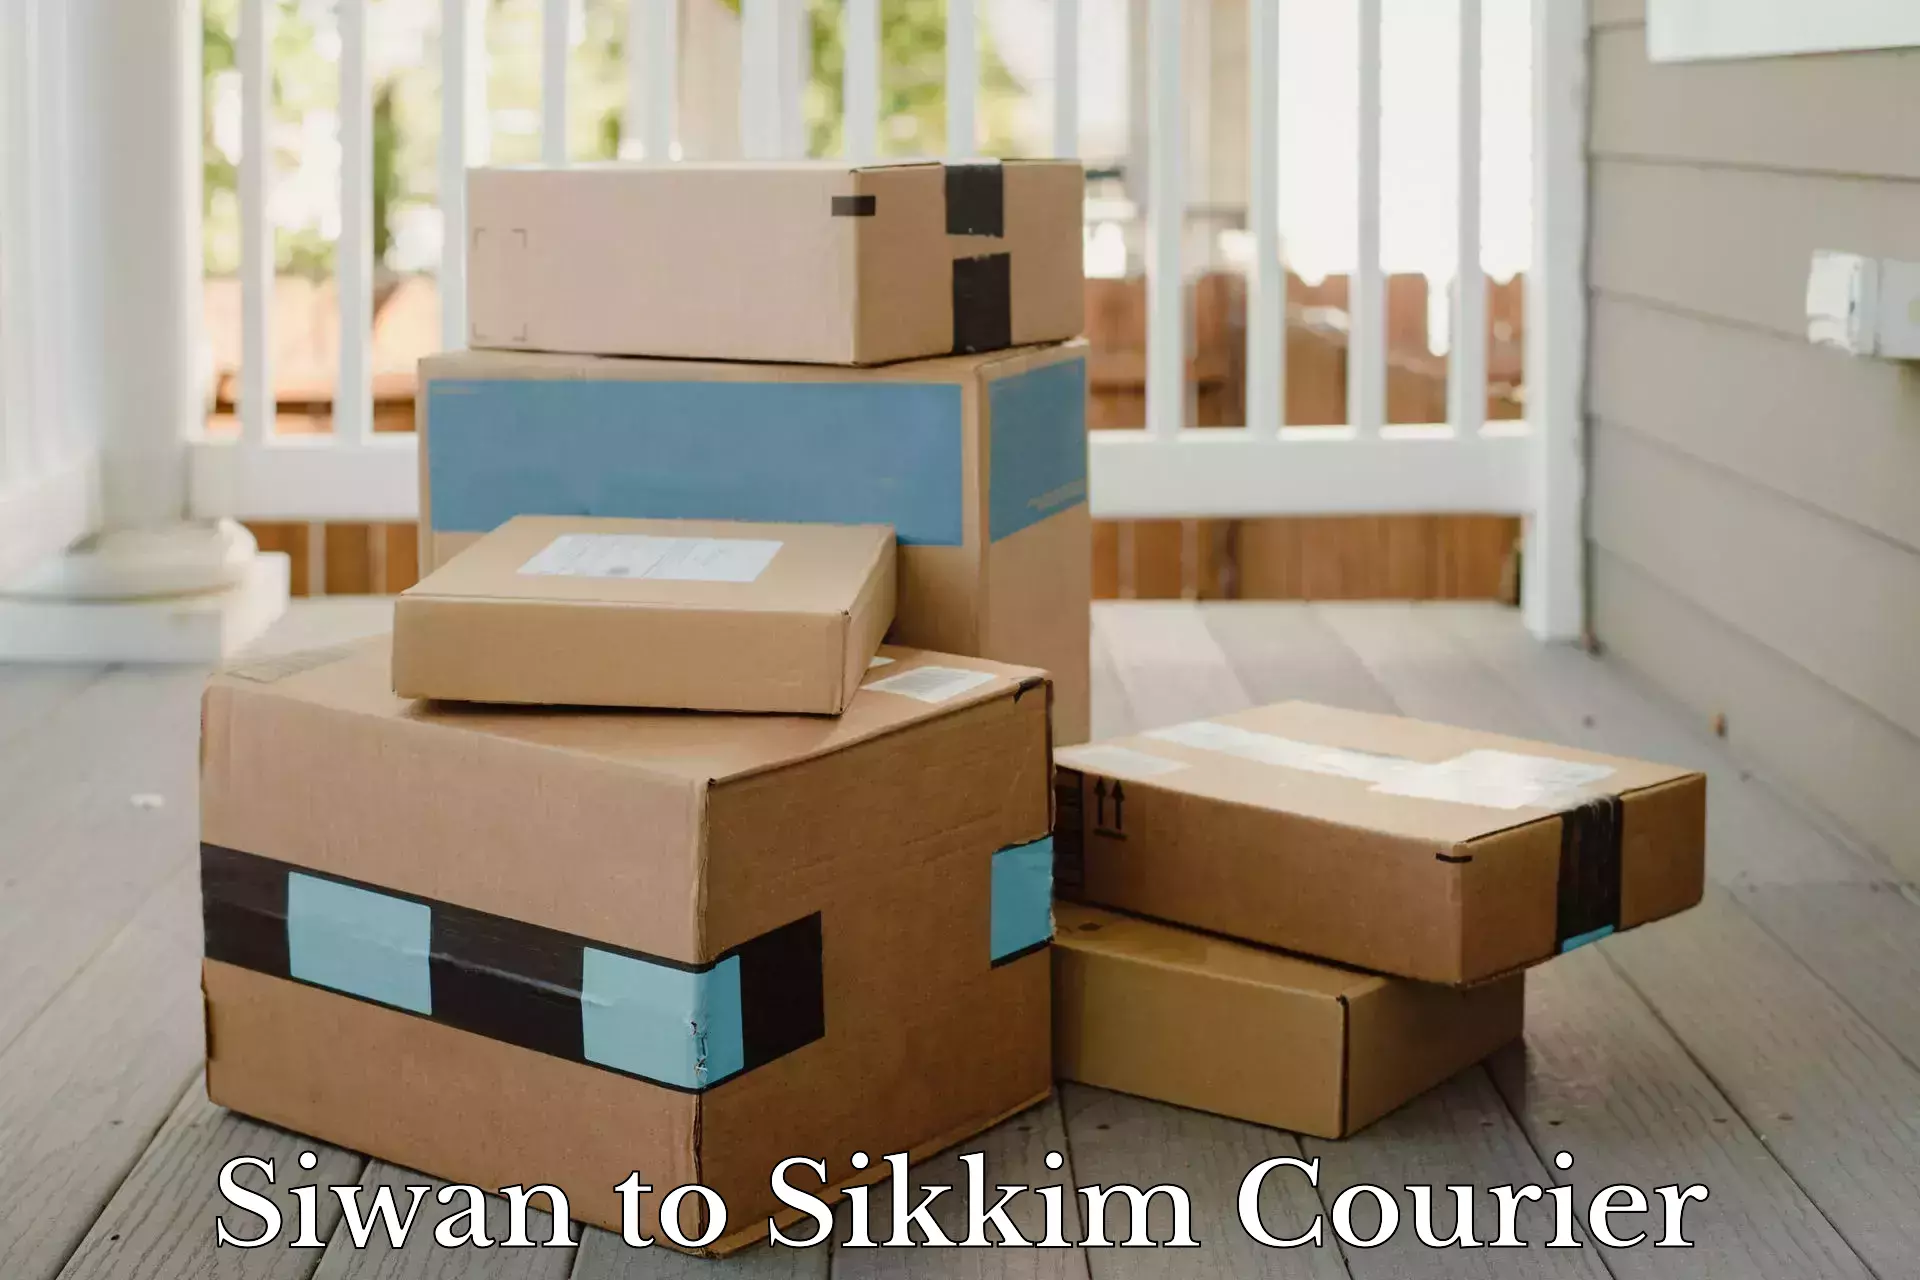 High-performance logistics Siwan to West Sikkim